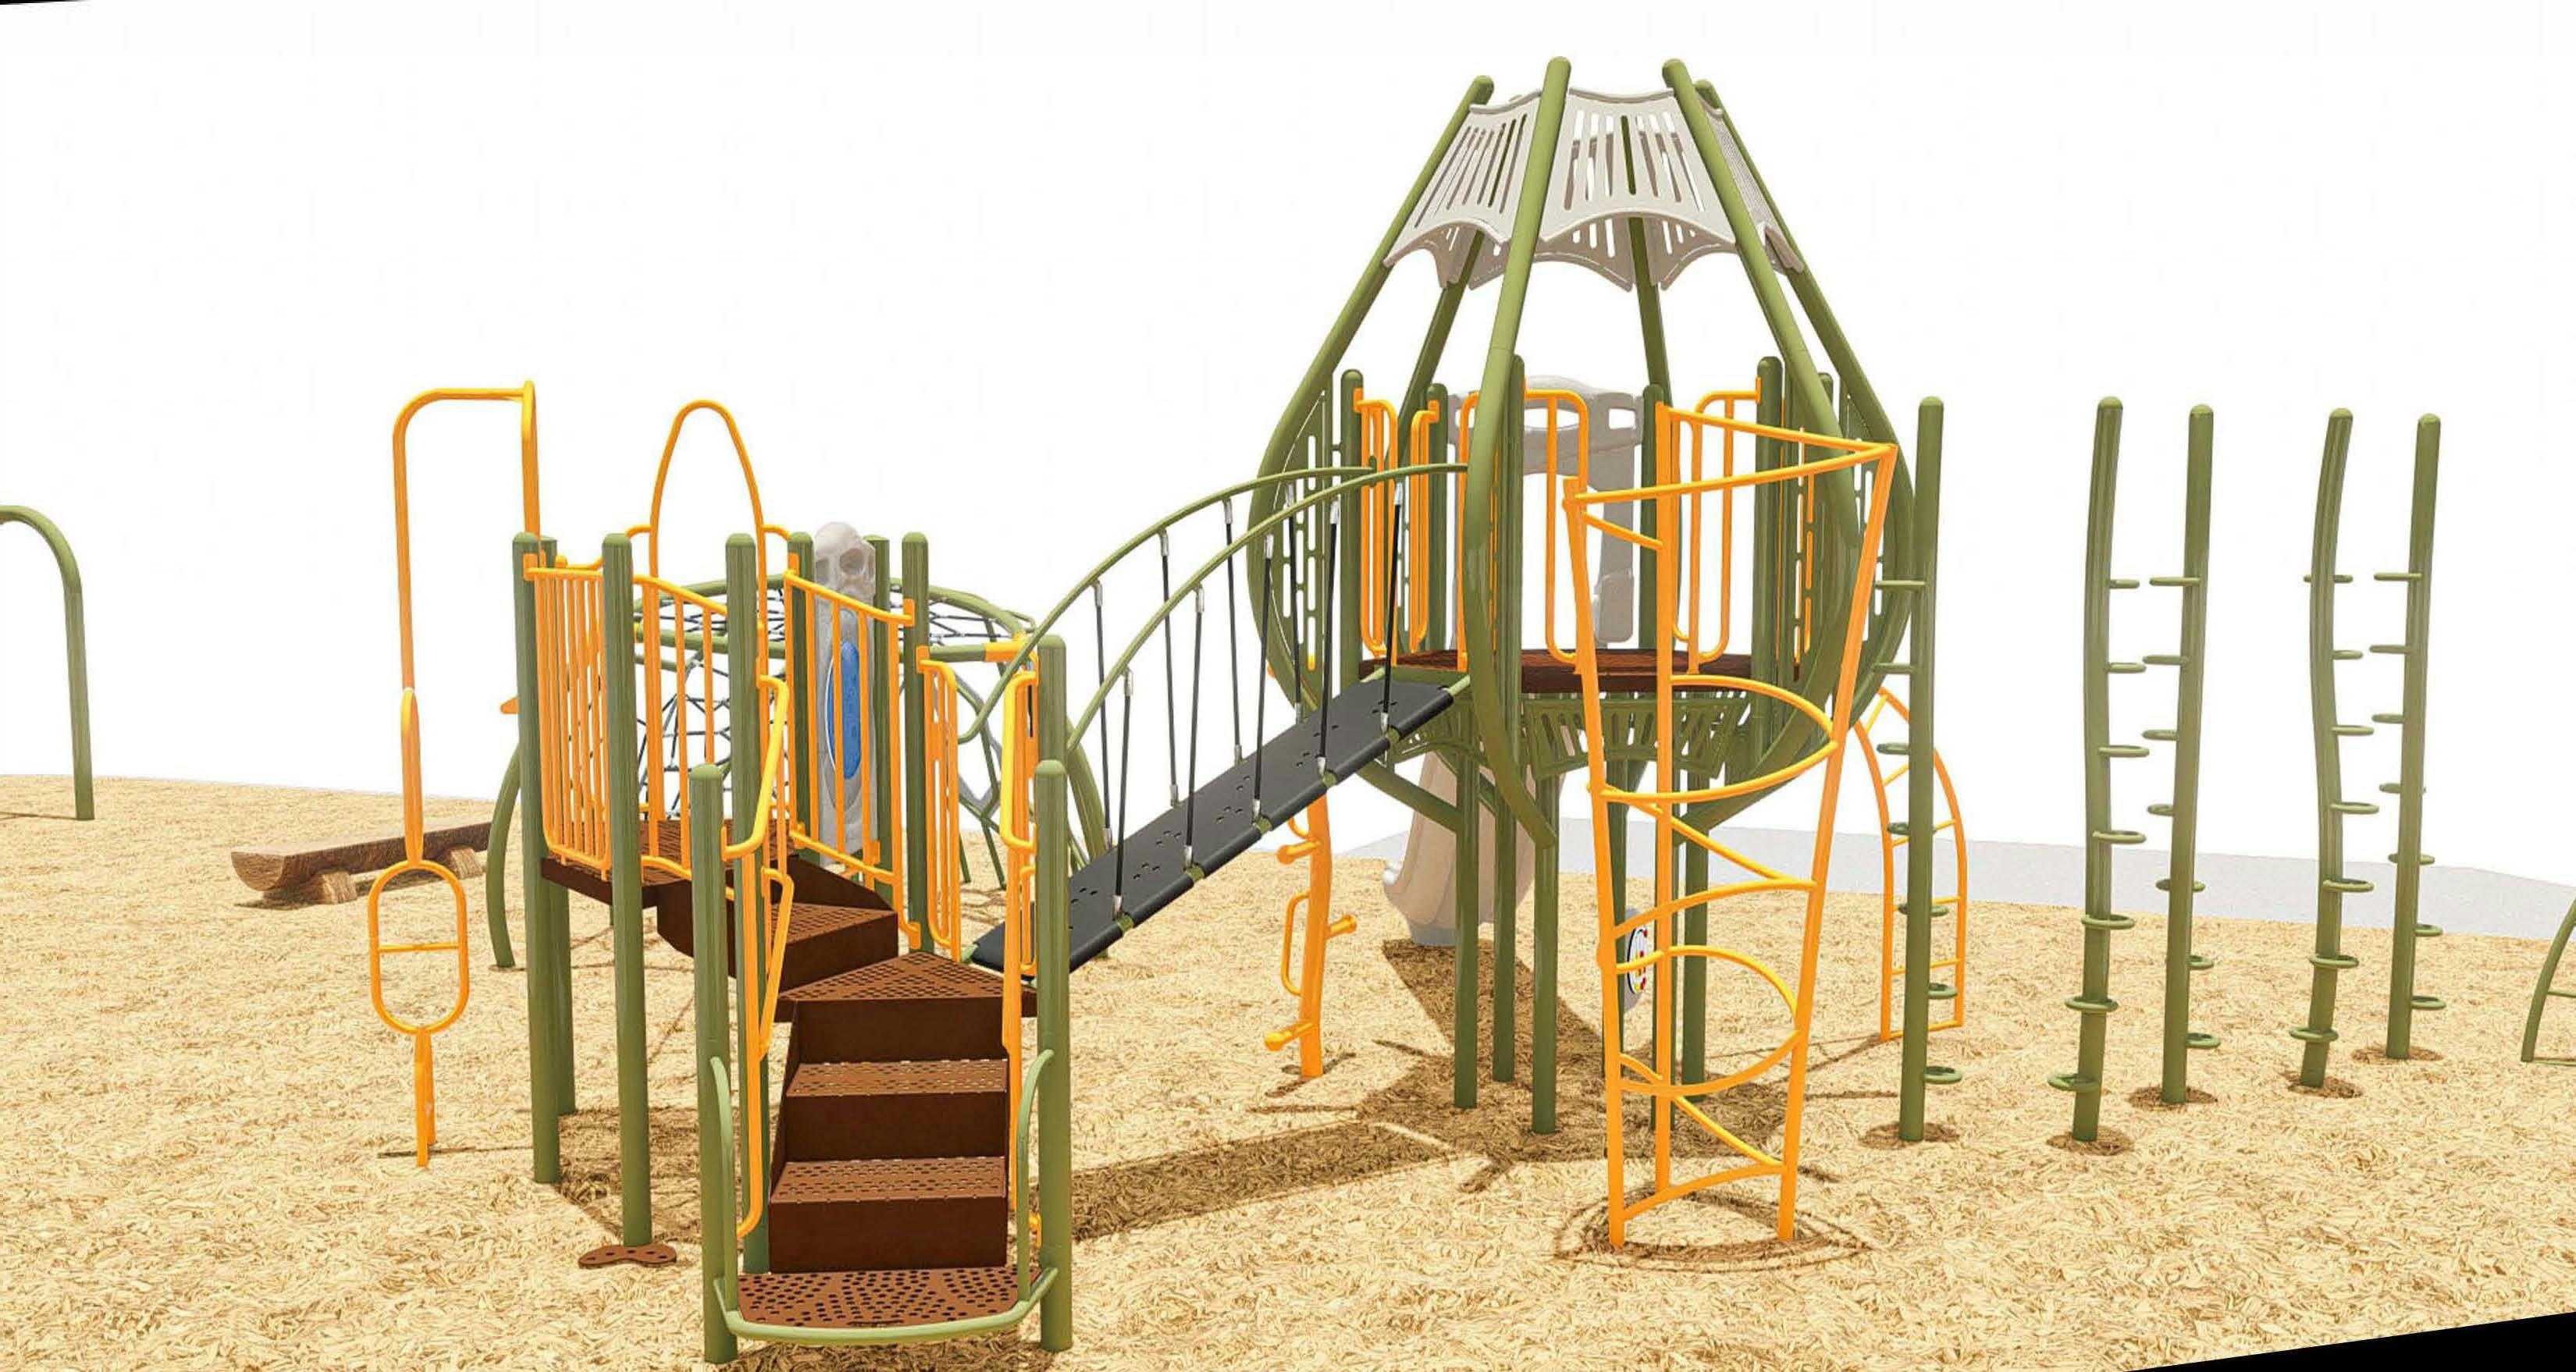 Climber for ages 5 to 12